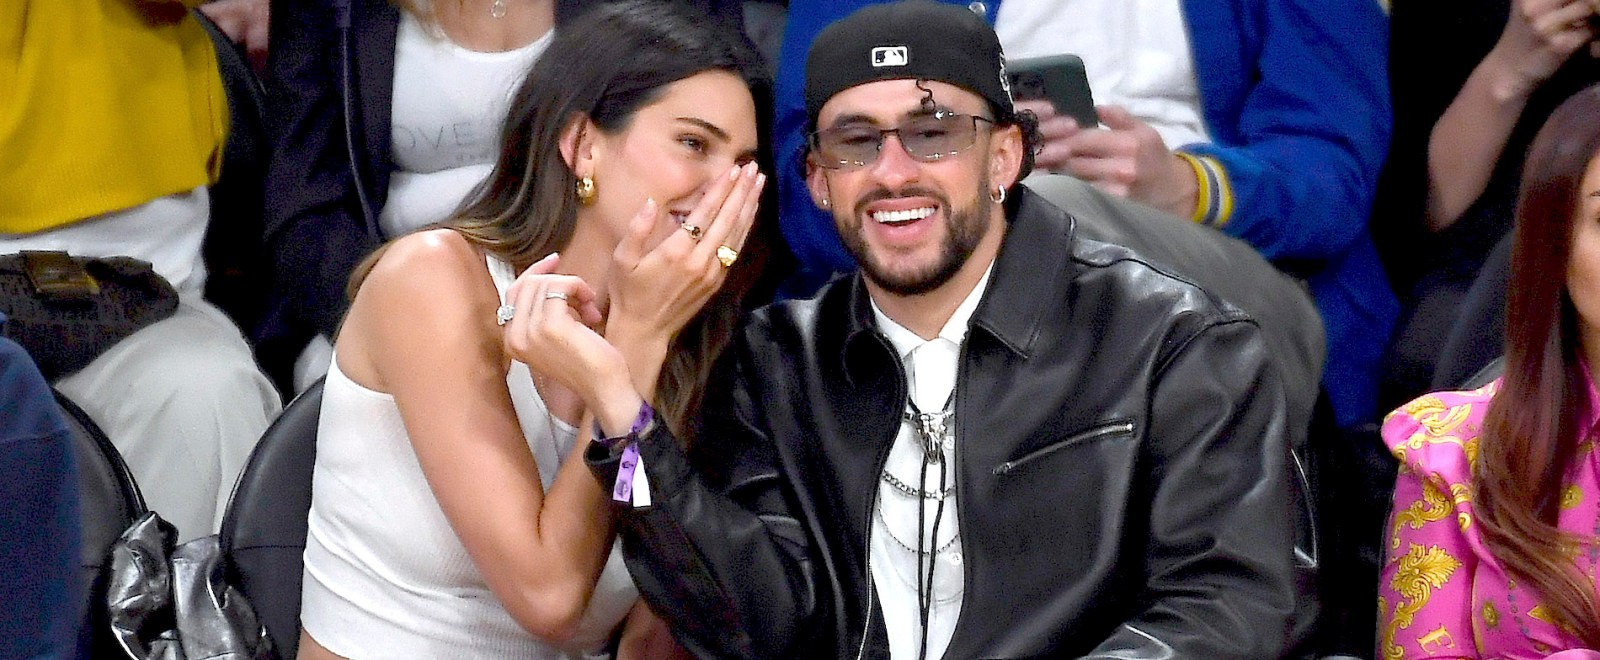 Kendall Jenner and her 'humiliating' gesture to Bad Bunny at Lakers game